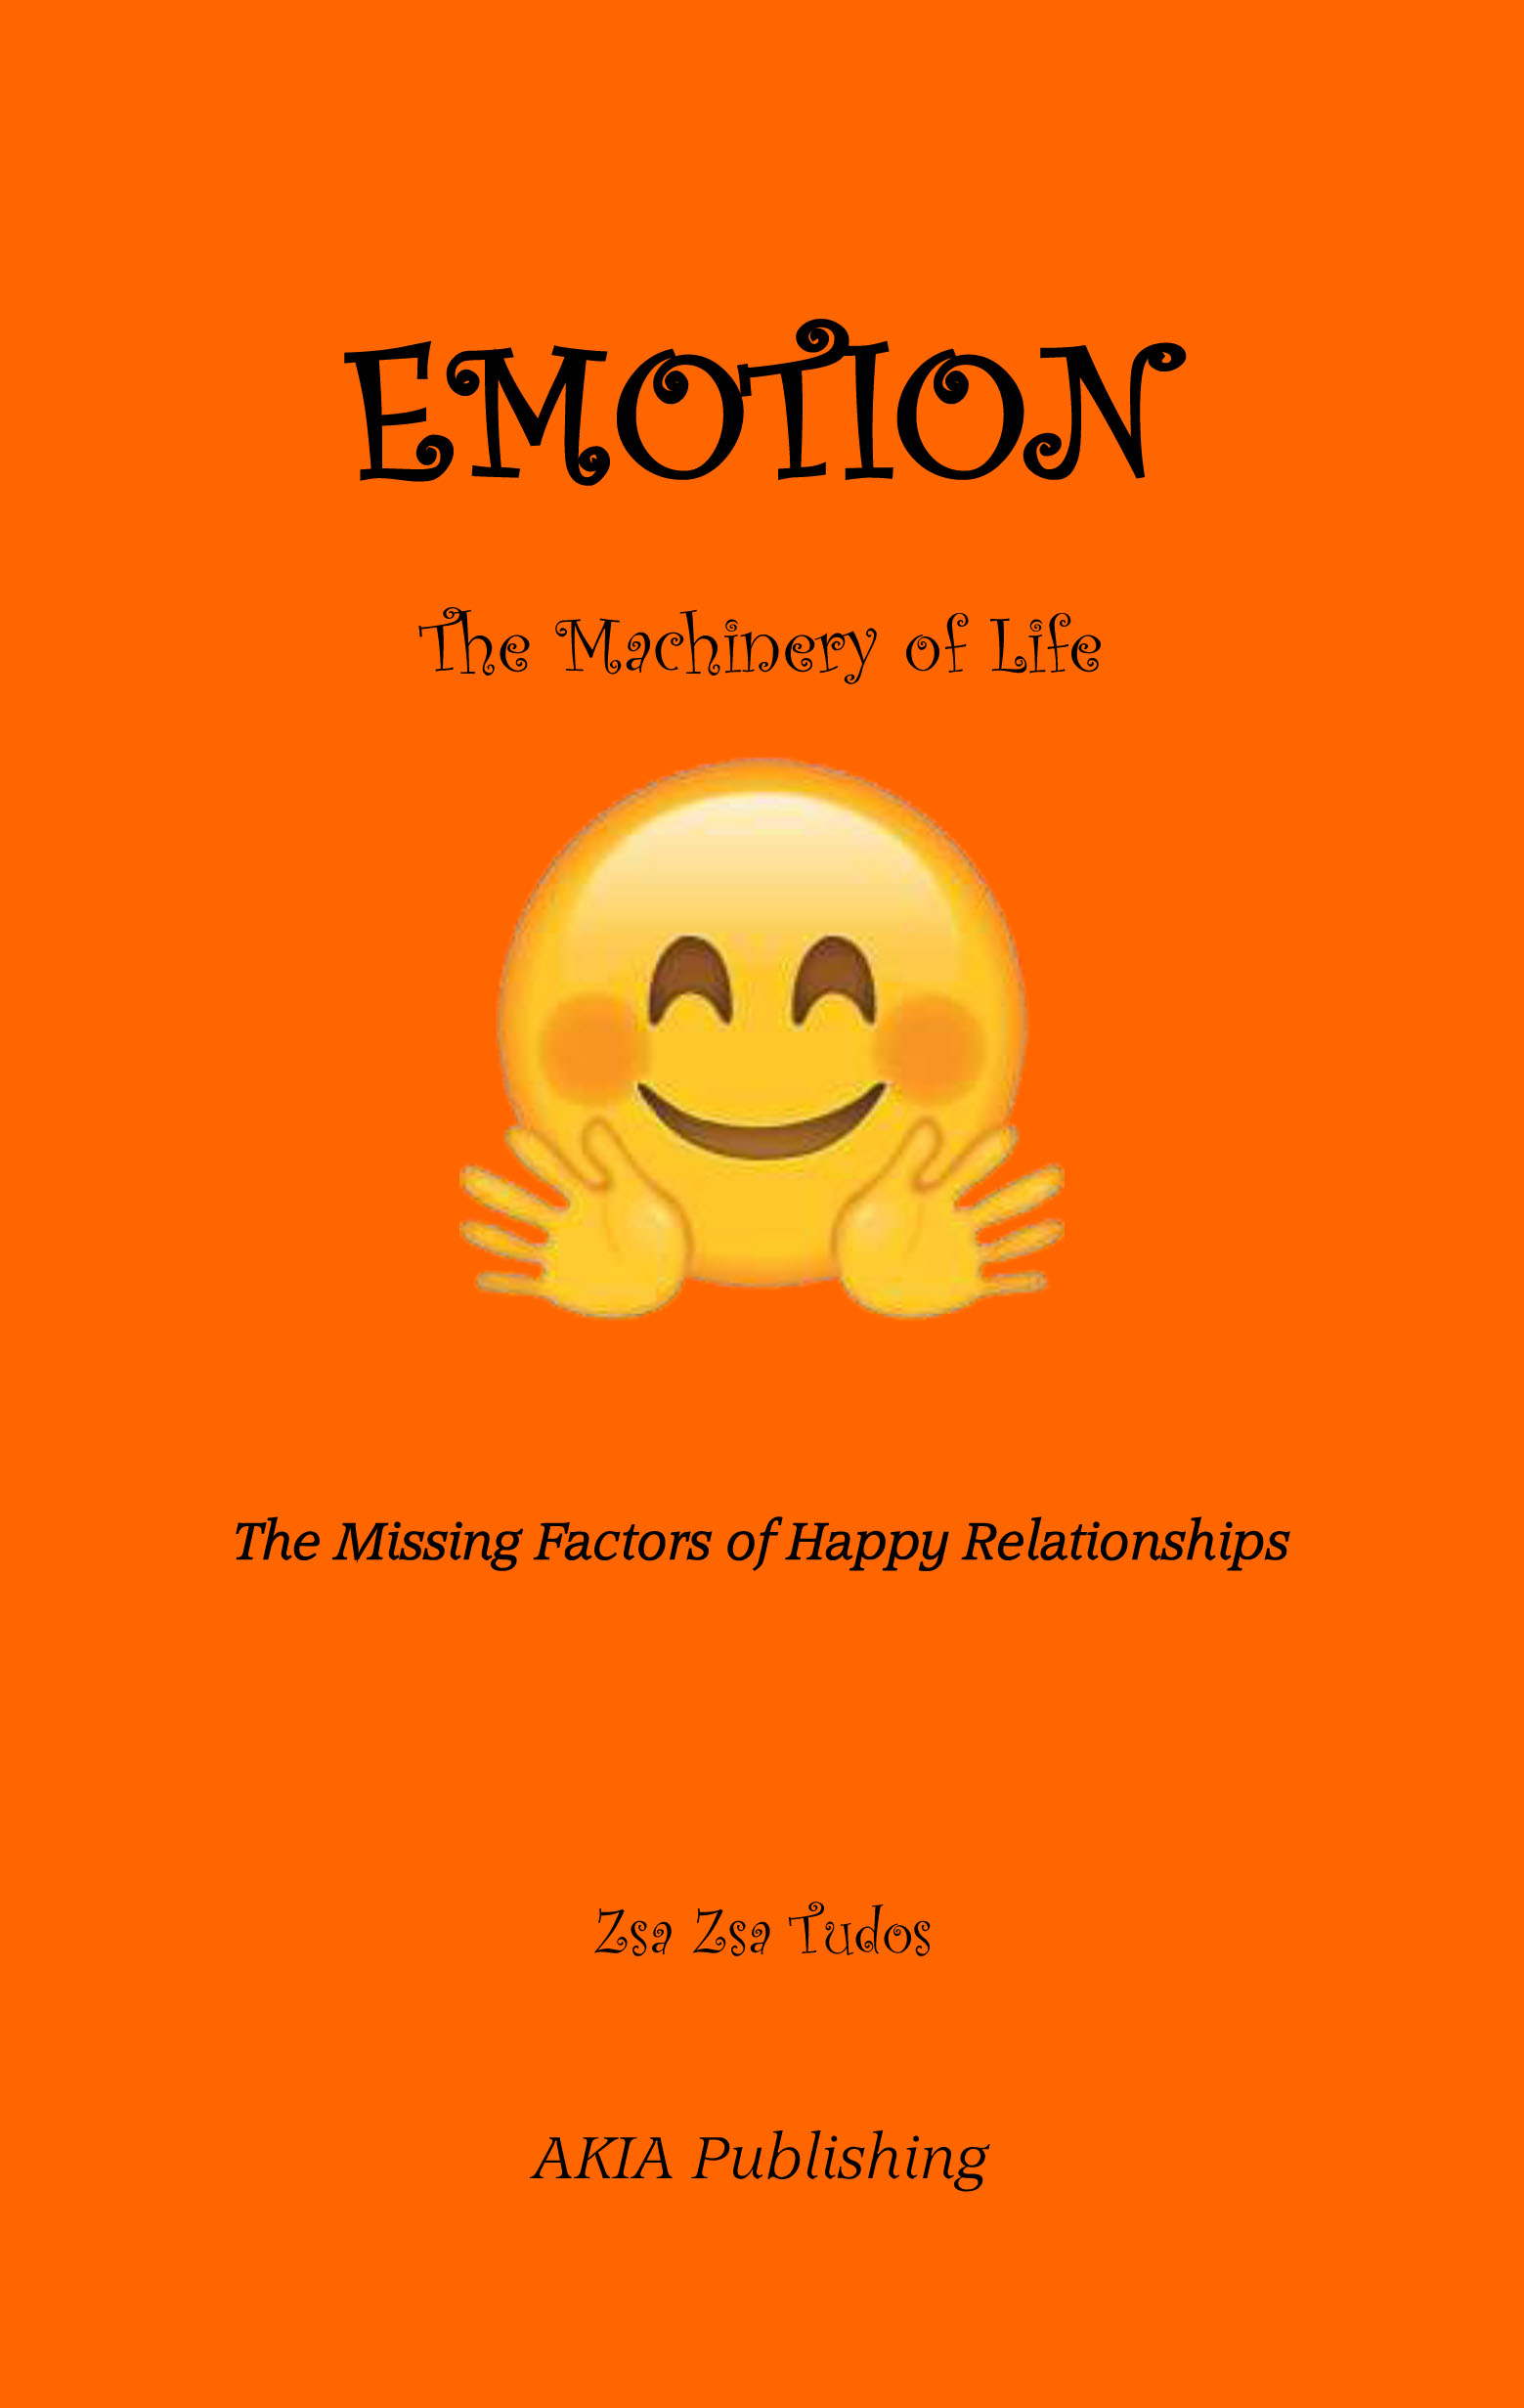 FREE: Emotion – The Machinery of Life: The Missing Factors of Happy Relationships by Zsa Zsa Tudos